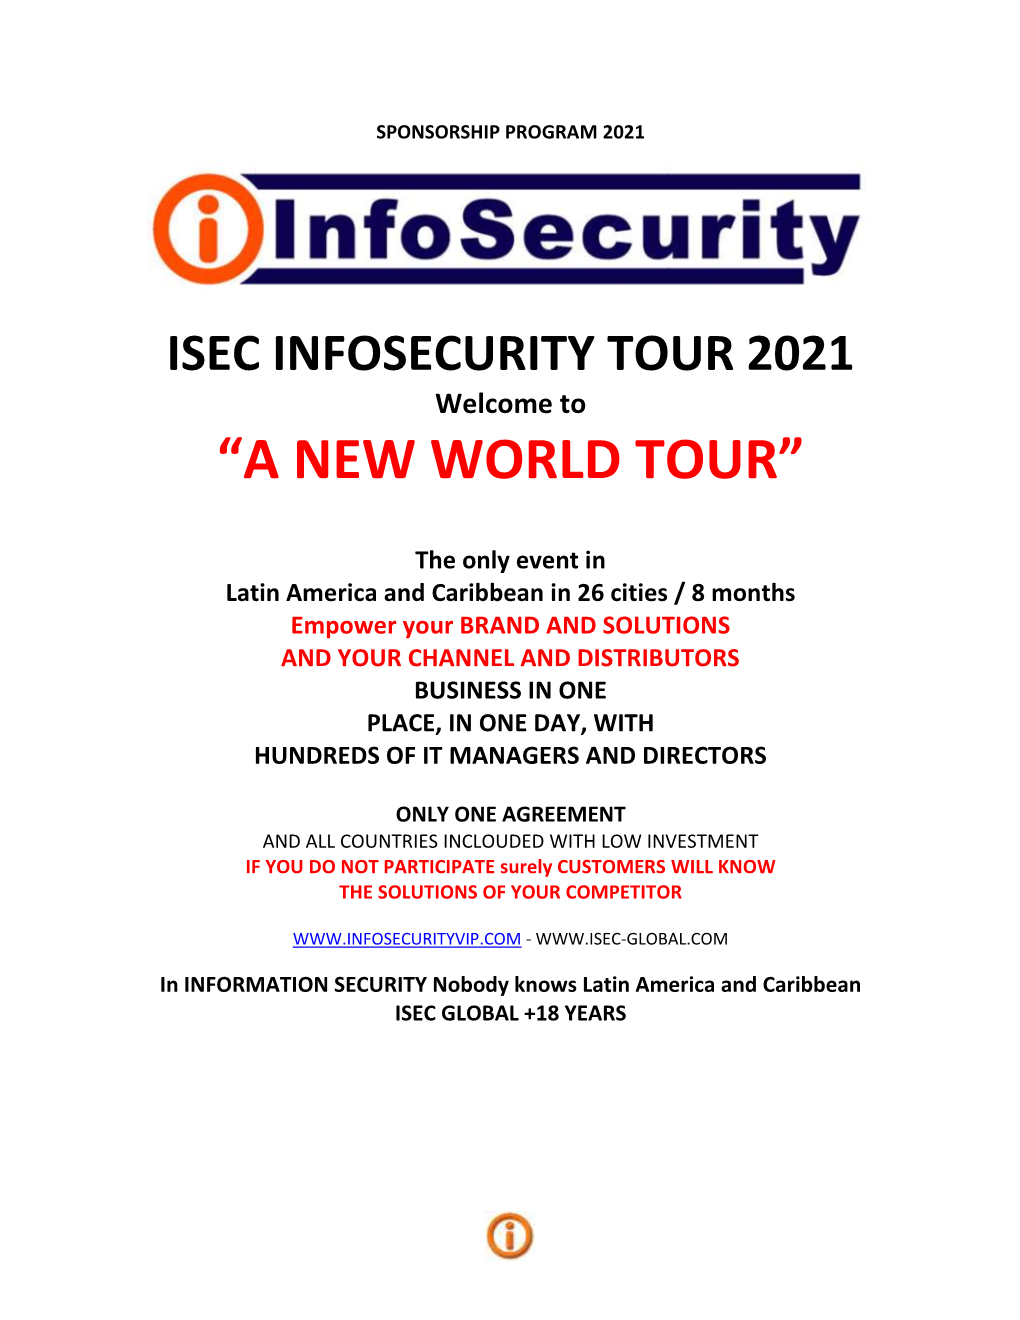 ISEC INFOSECURITY TOUR 2021 Welcome to “A NEW WORLD TOUR”